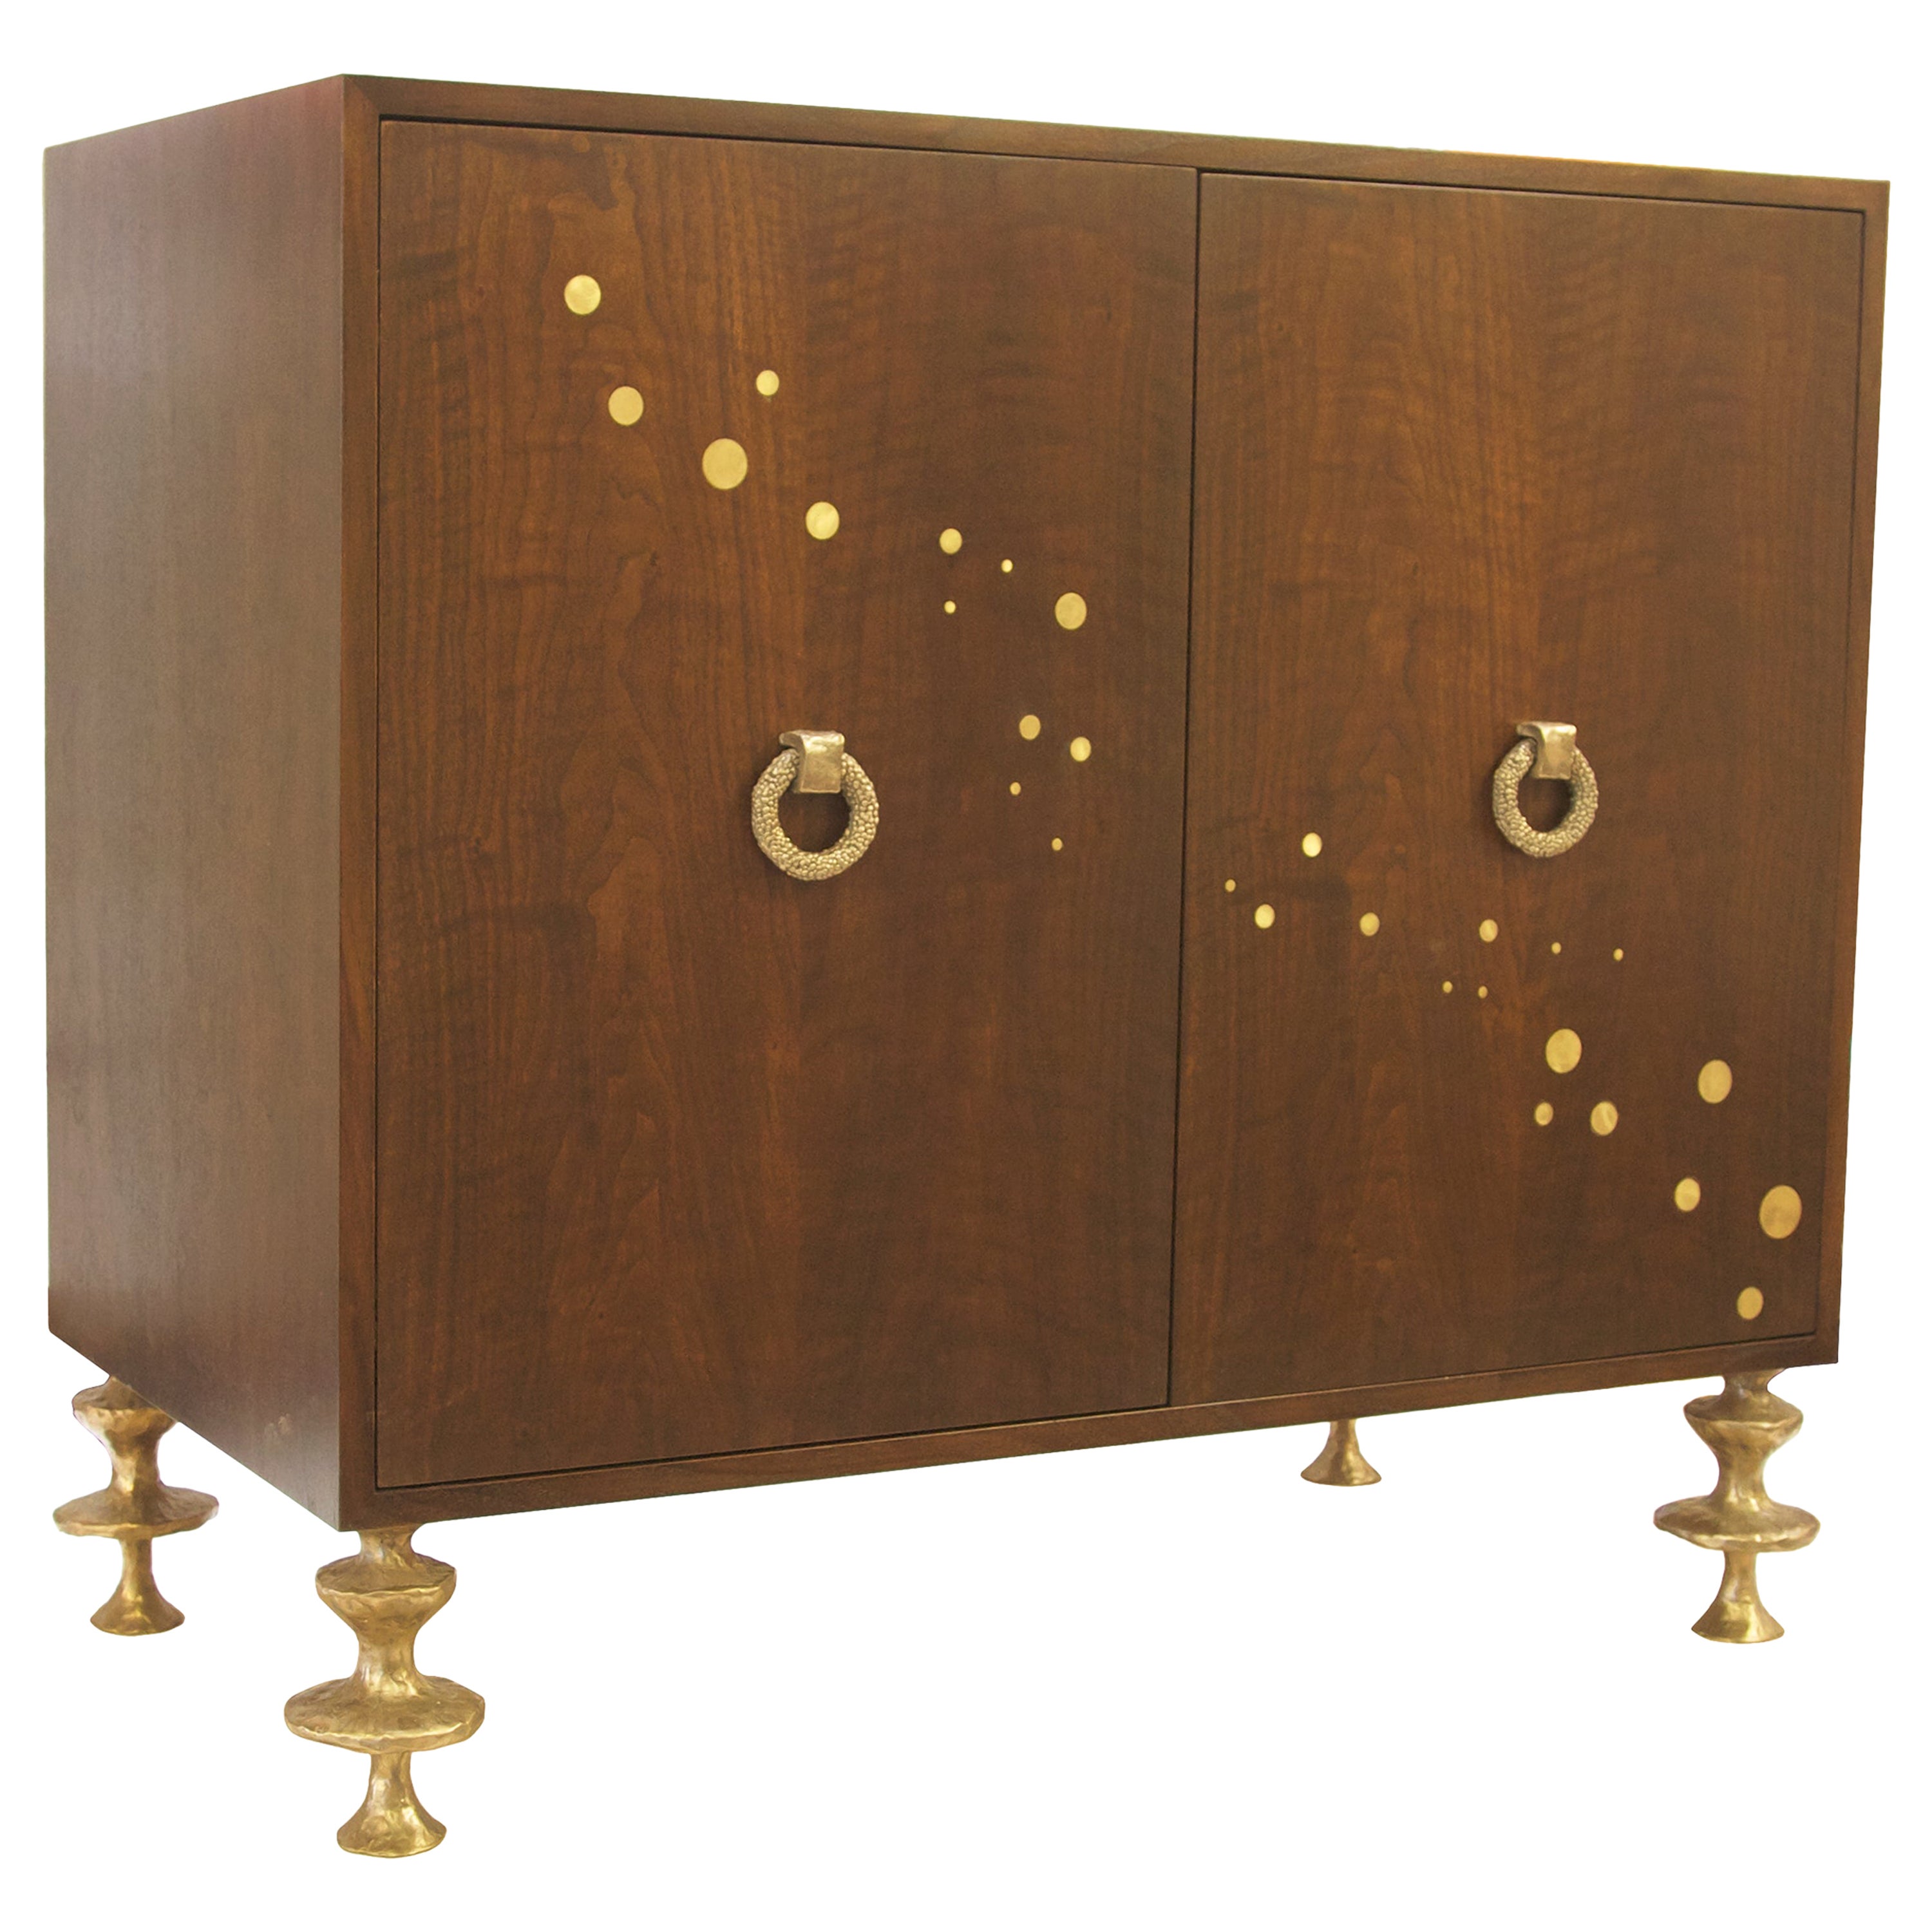 Walnut and Bronze Bar Cabinet with Hand-Sculpted Bronze Handles and Legs